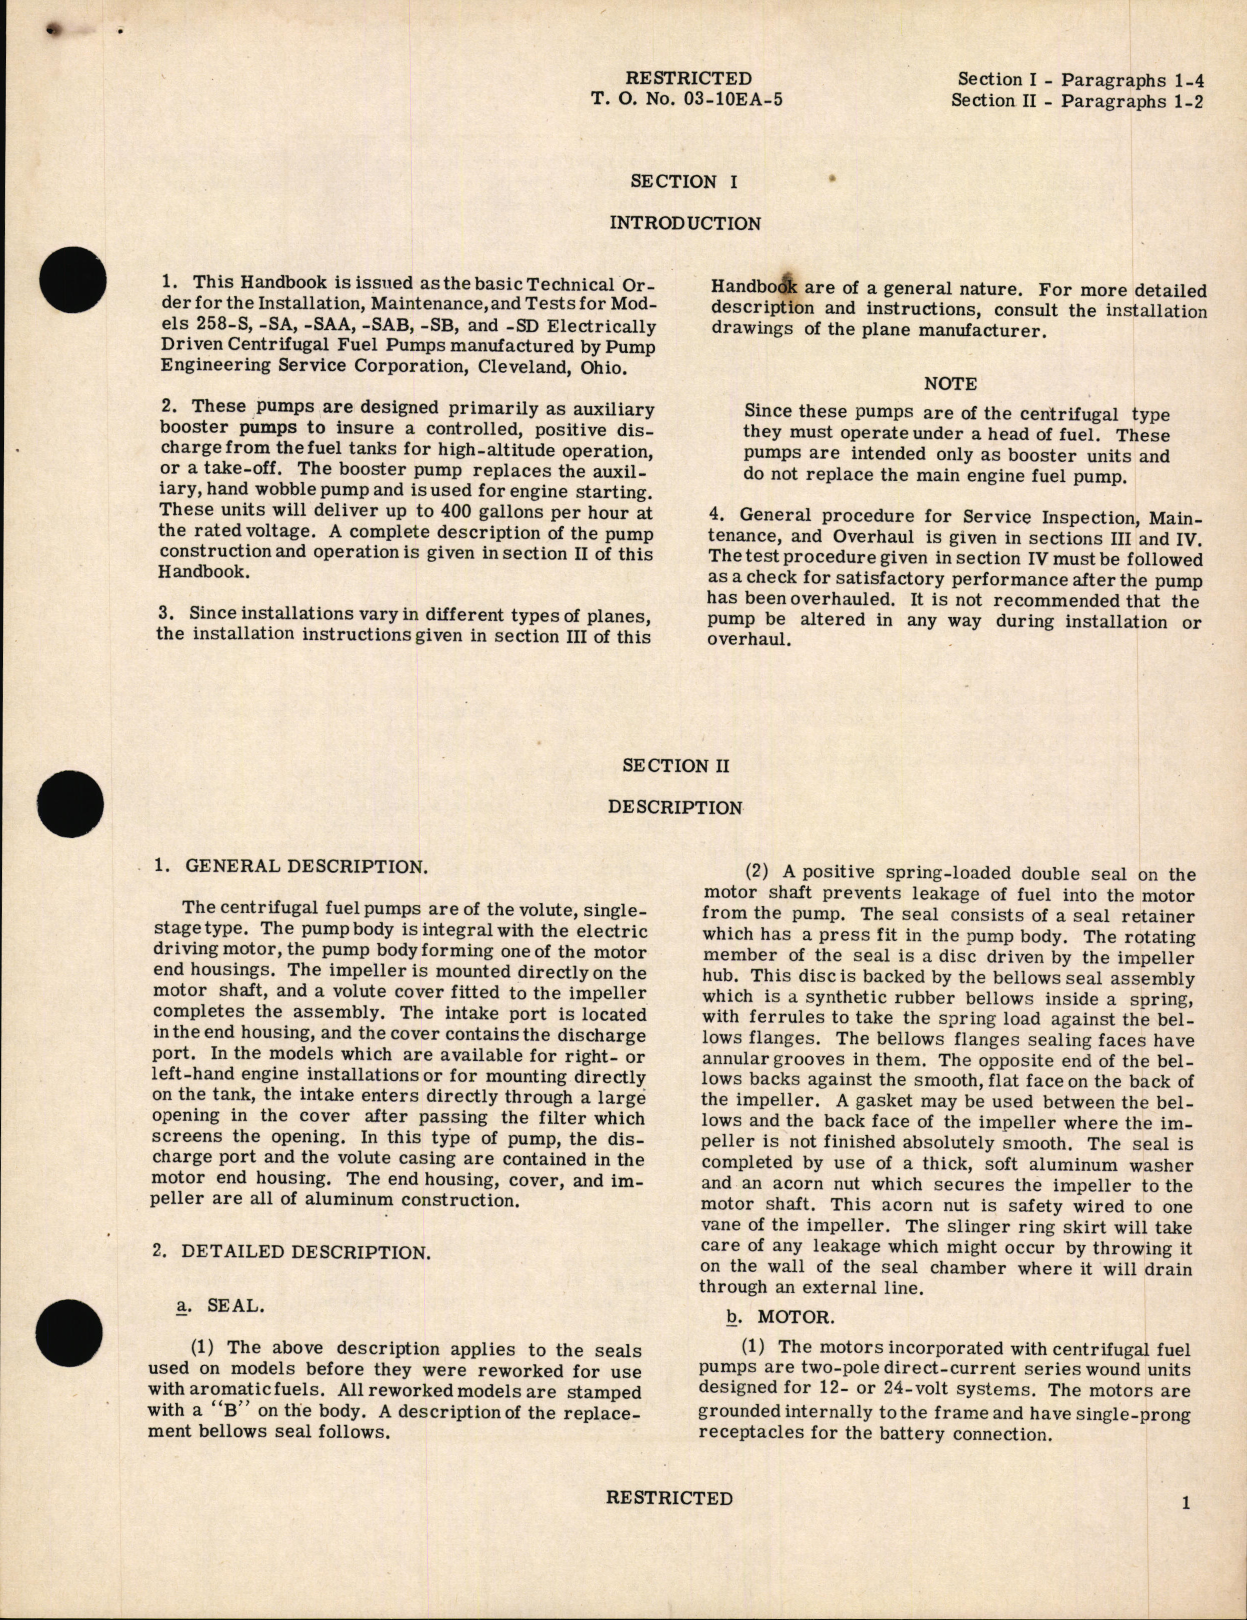 Sample page 7 from AirCorps Library document: Handbook of Instructions with Parts List for Centrifugal Fuel Pump Model 258 Series